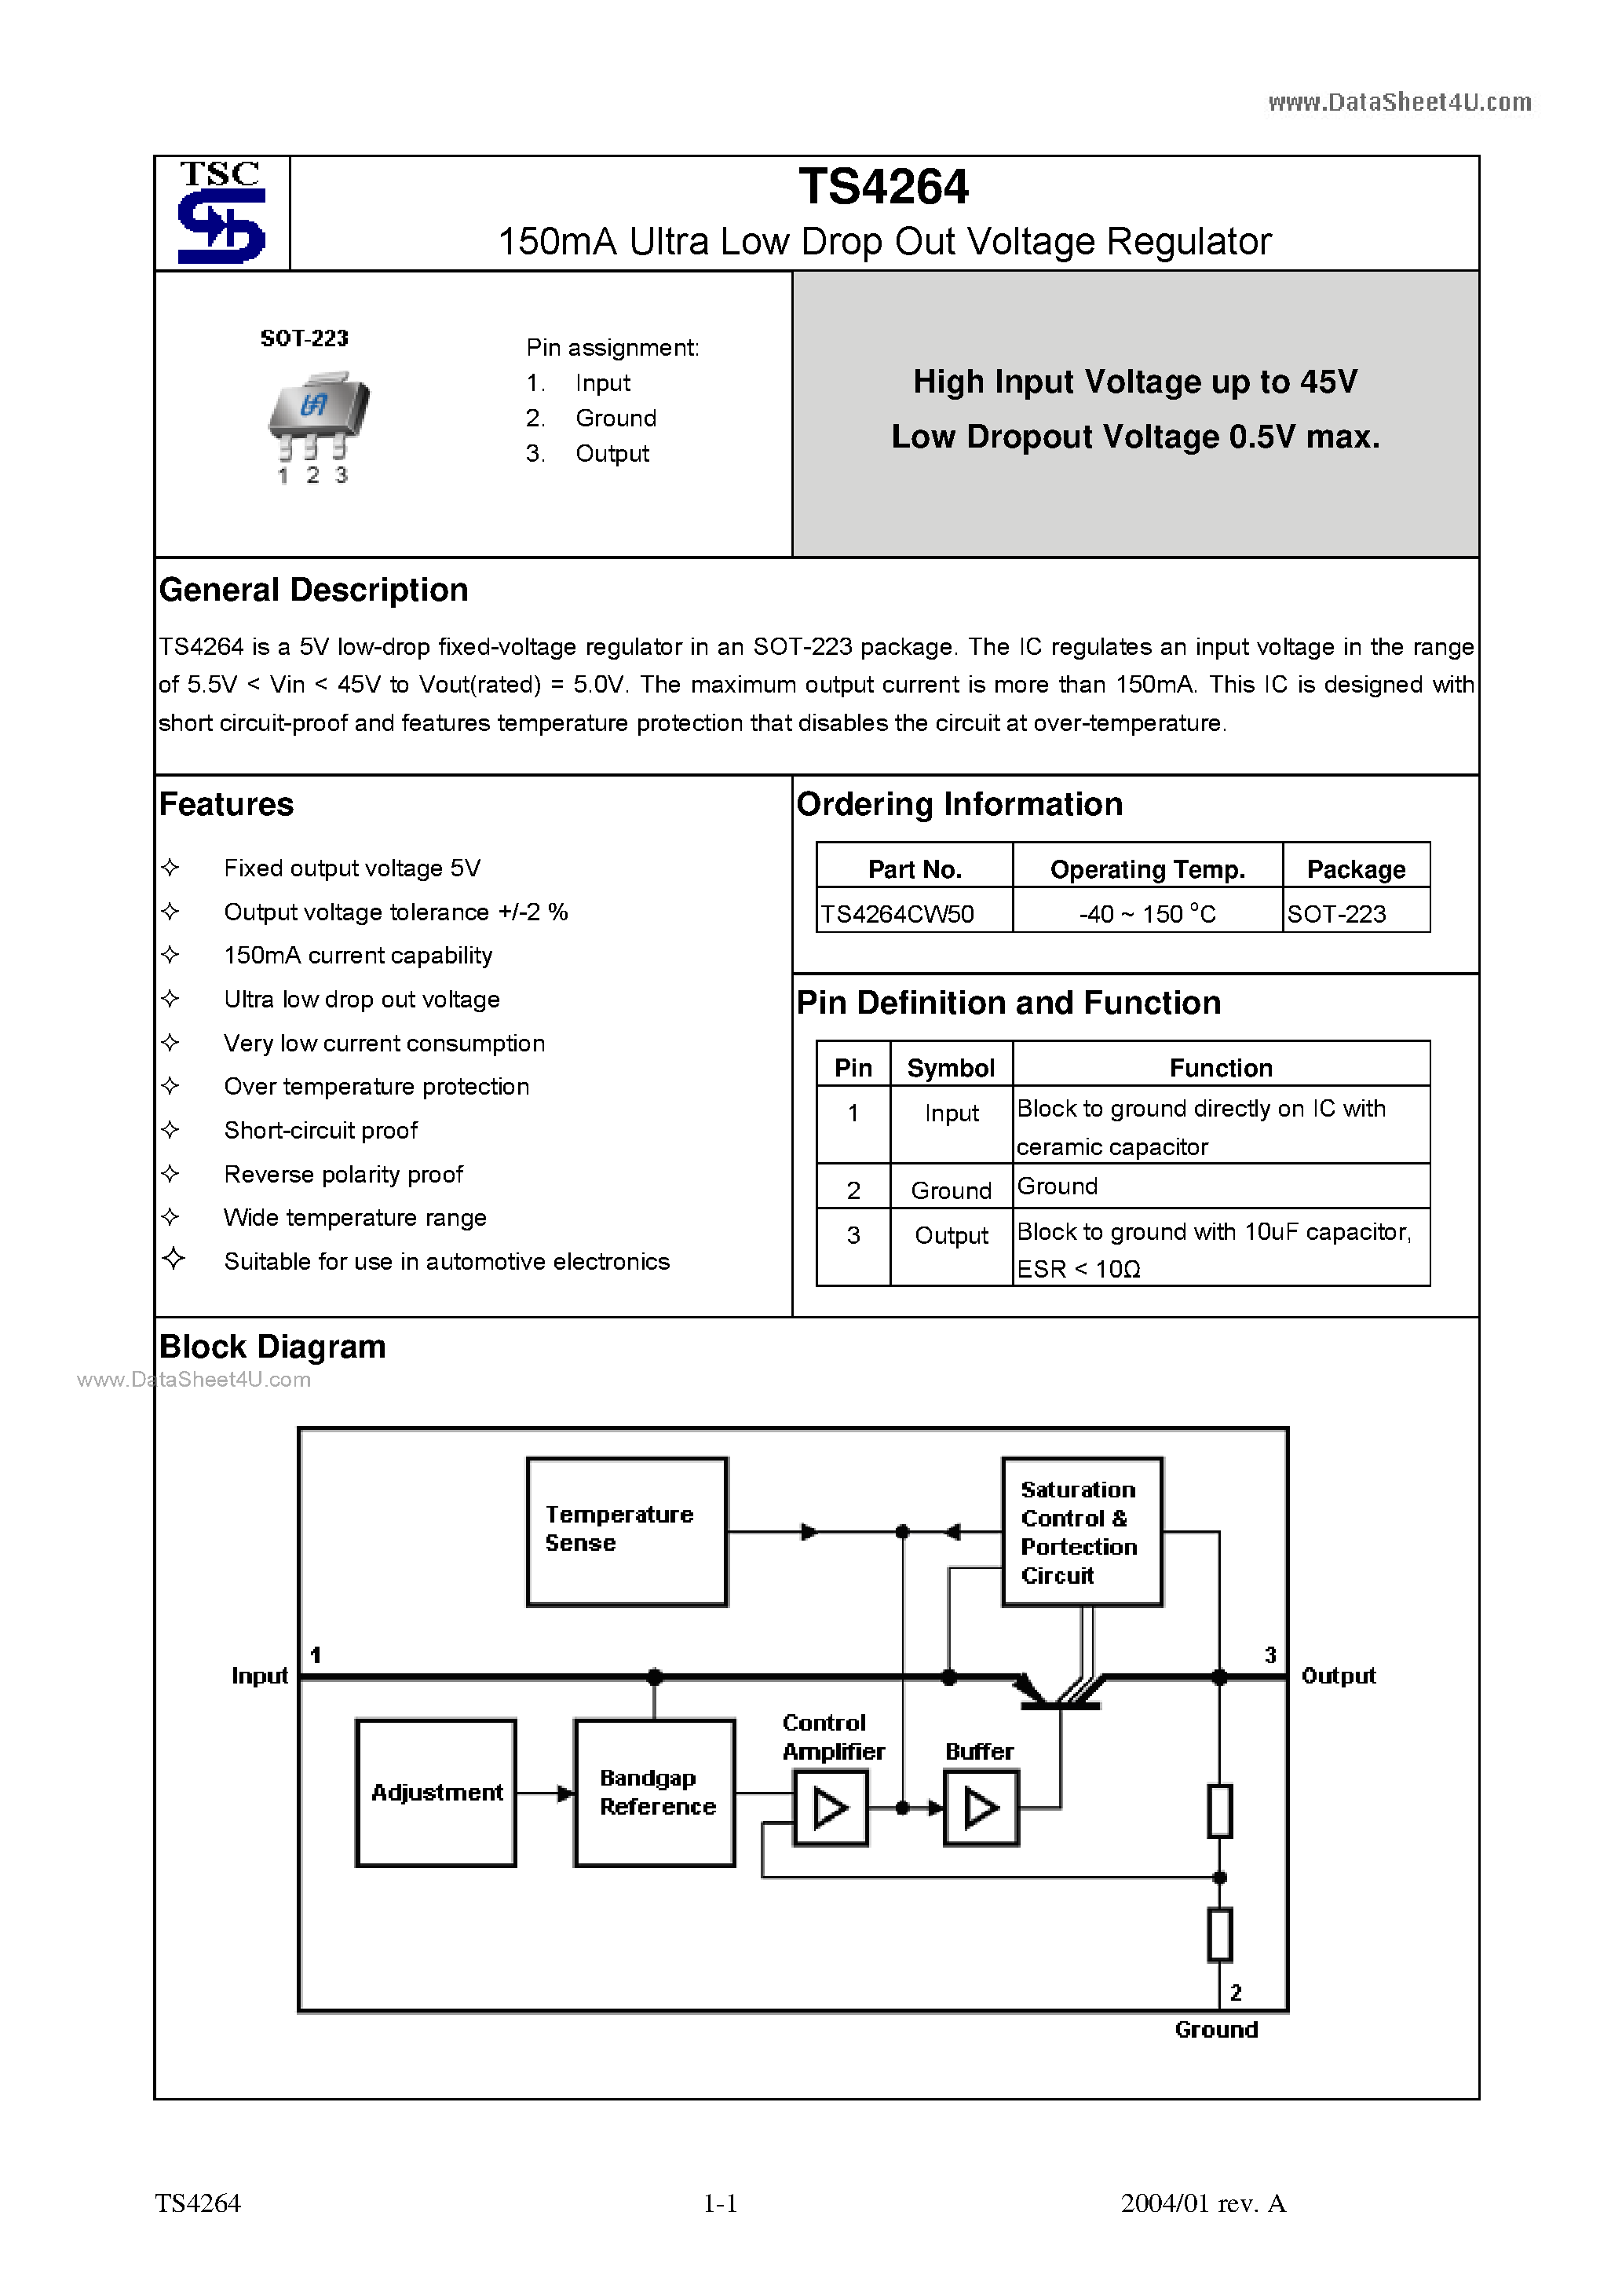 Datasheet TS4264 - 150mA Ultra Low Drop Out Voltage Regulator page 1